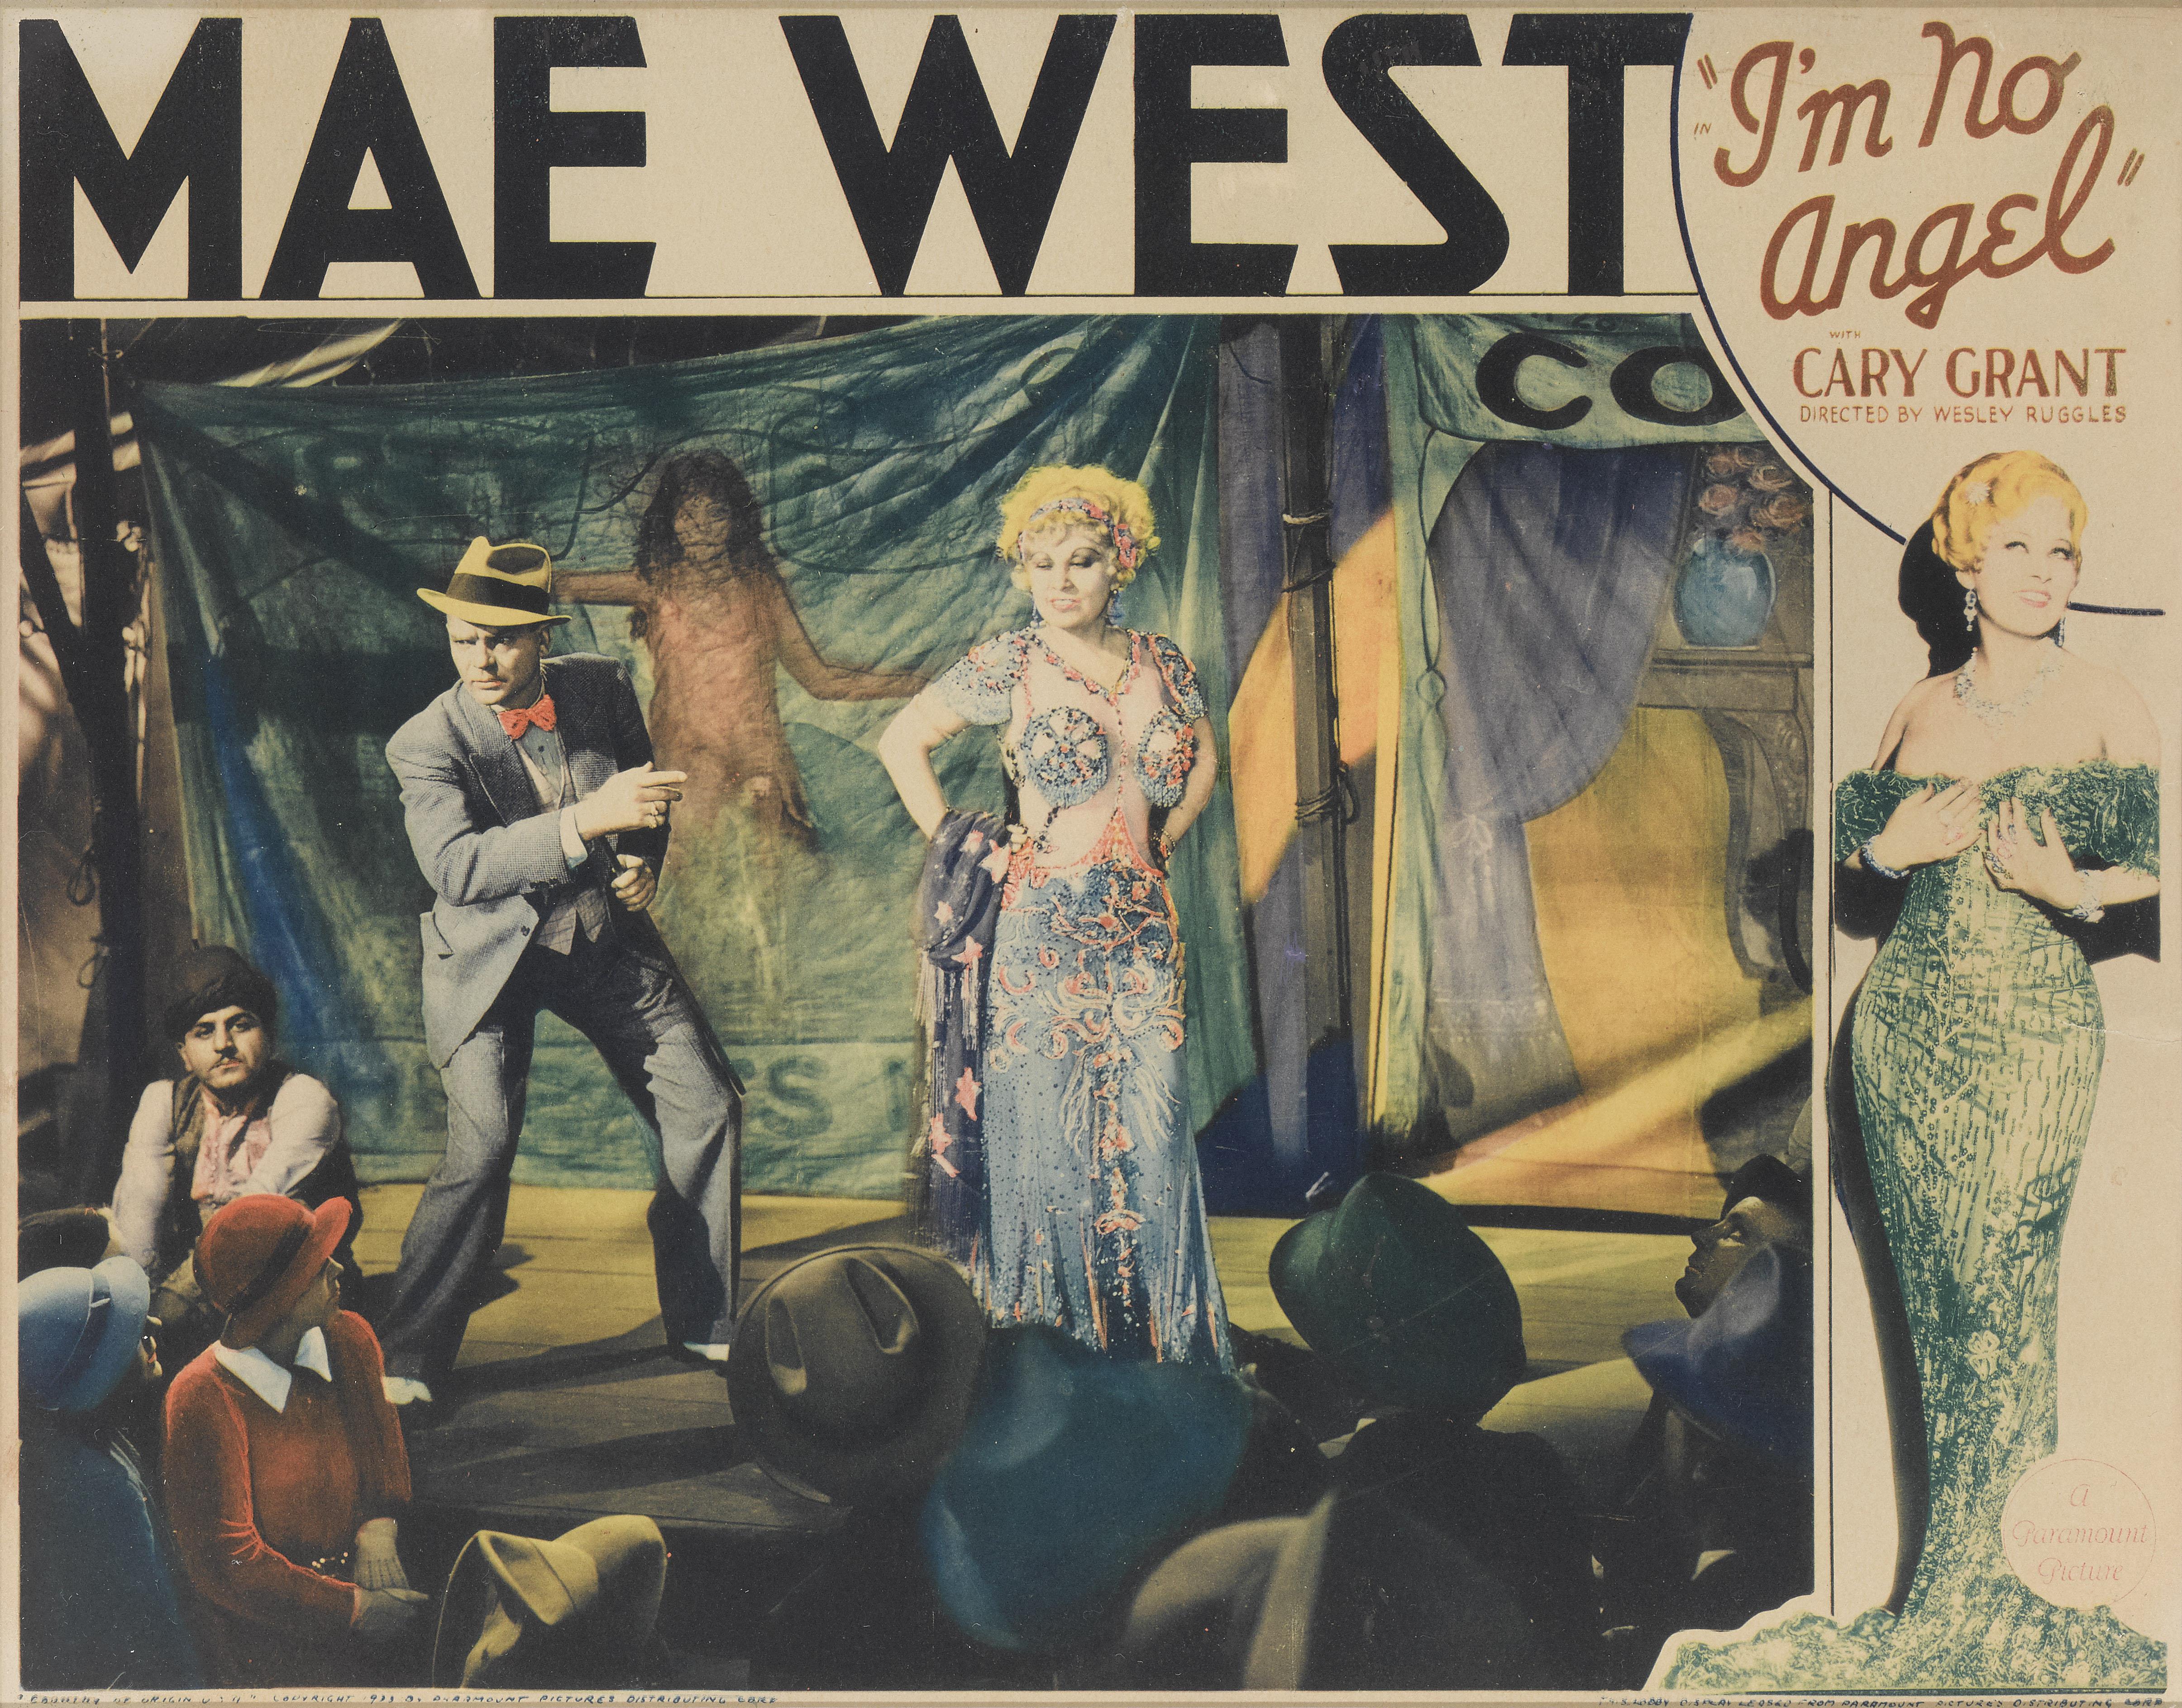 Original US lobby card for the 19343 Musical comedy romance I'm No Angel.
This film starred May West, Cary Grant and Gregory Ratoff and was directed by Wesley Ruggles.
This lobby card is conservation framed with UV plexiglass in an Obeche wood